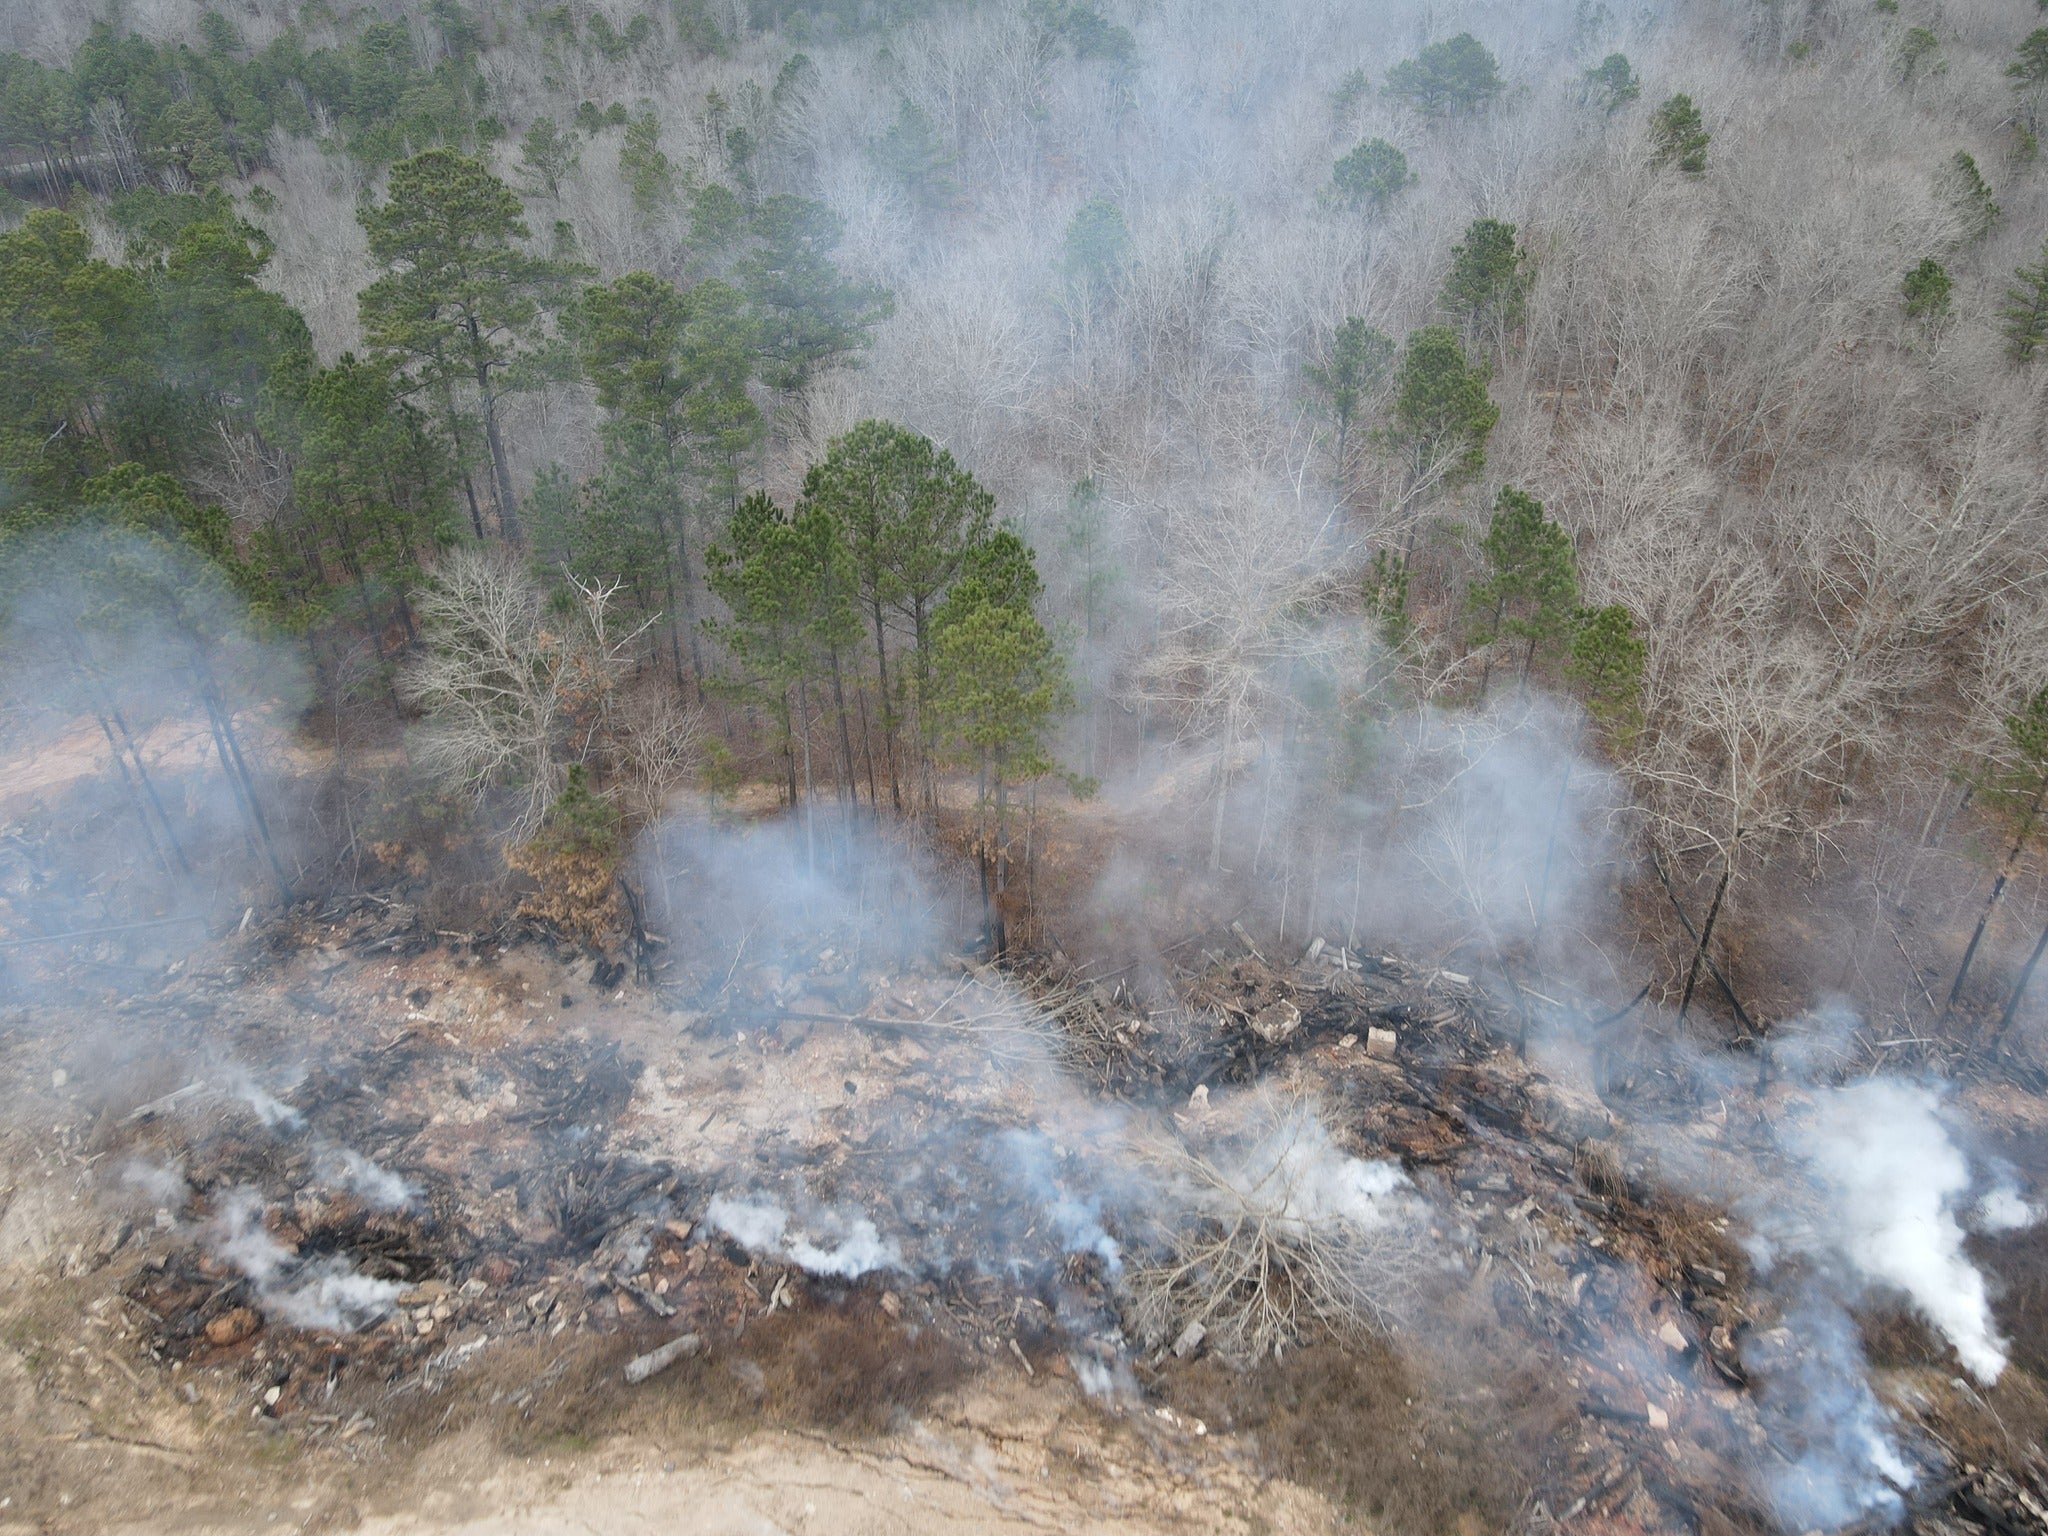 A Noxious Underground Landfill Fire Has Burned for Weeks in Alabama